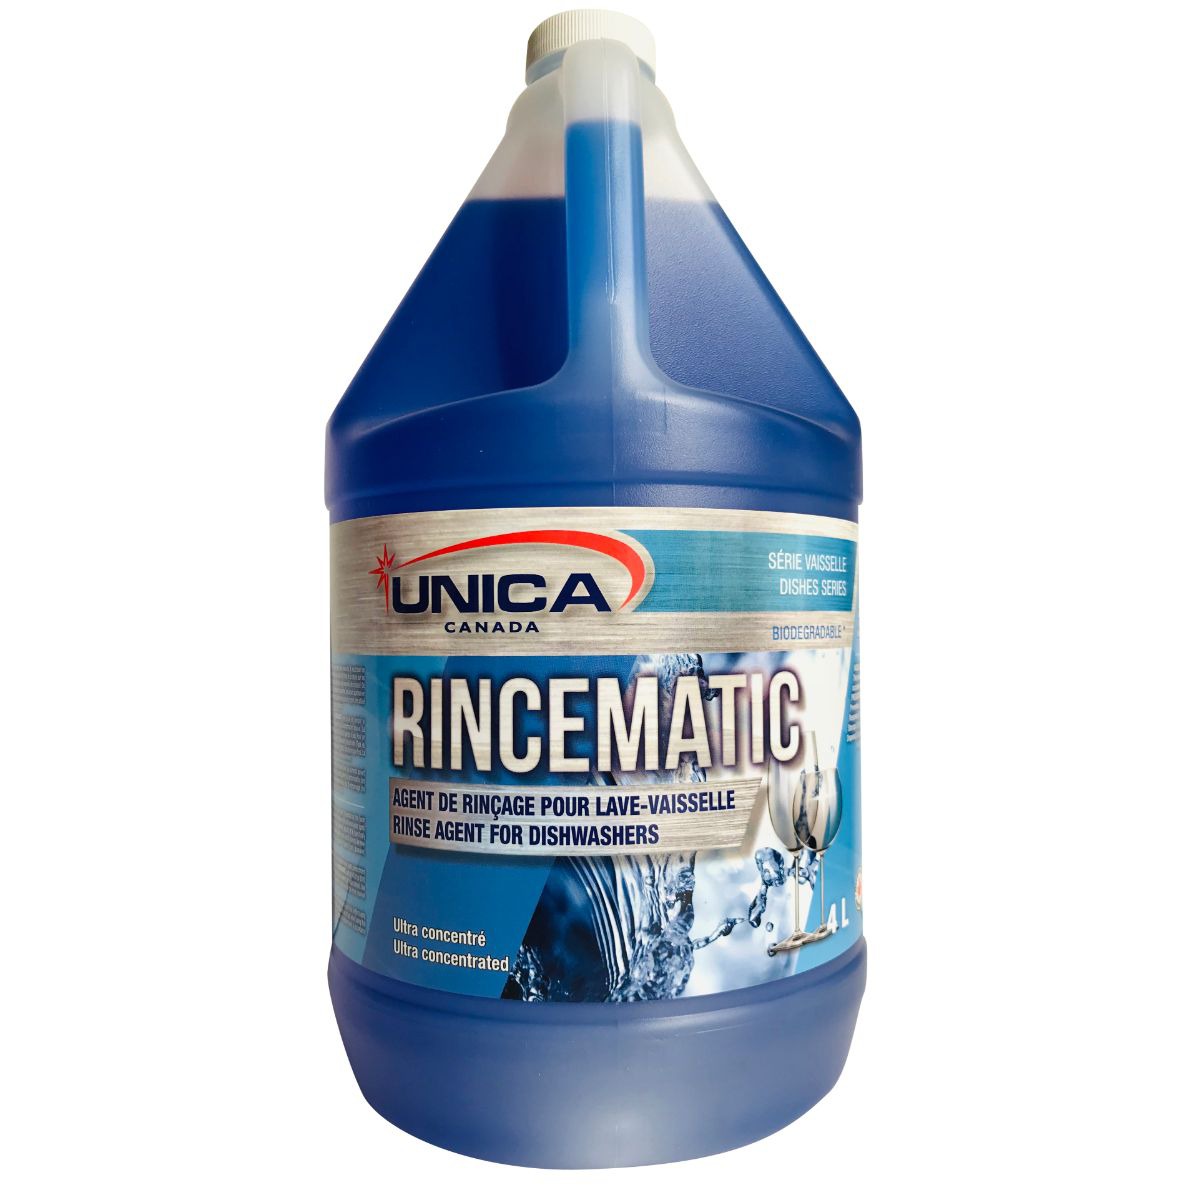 Rincematic